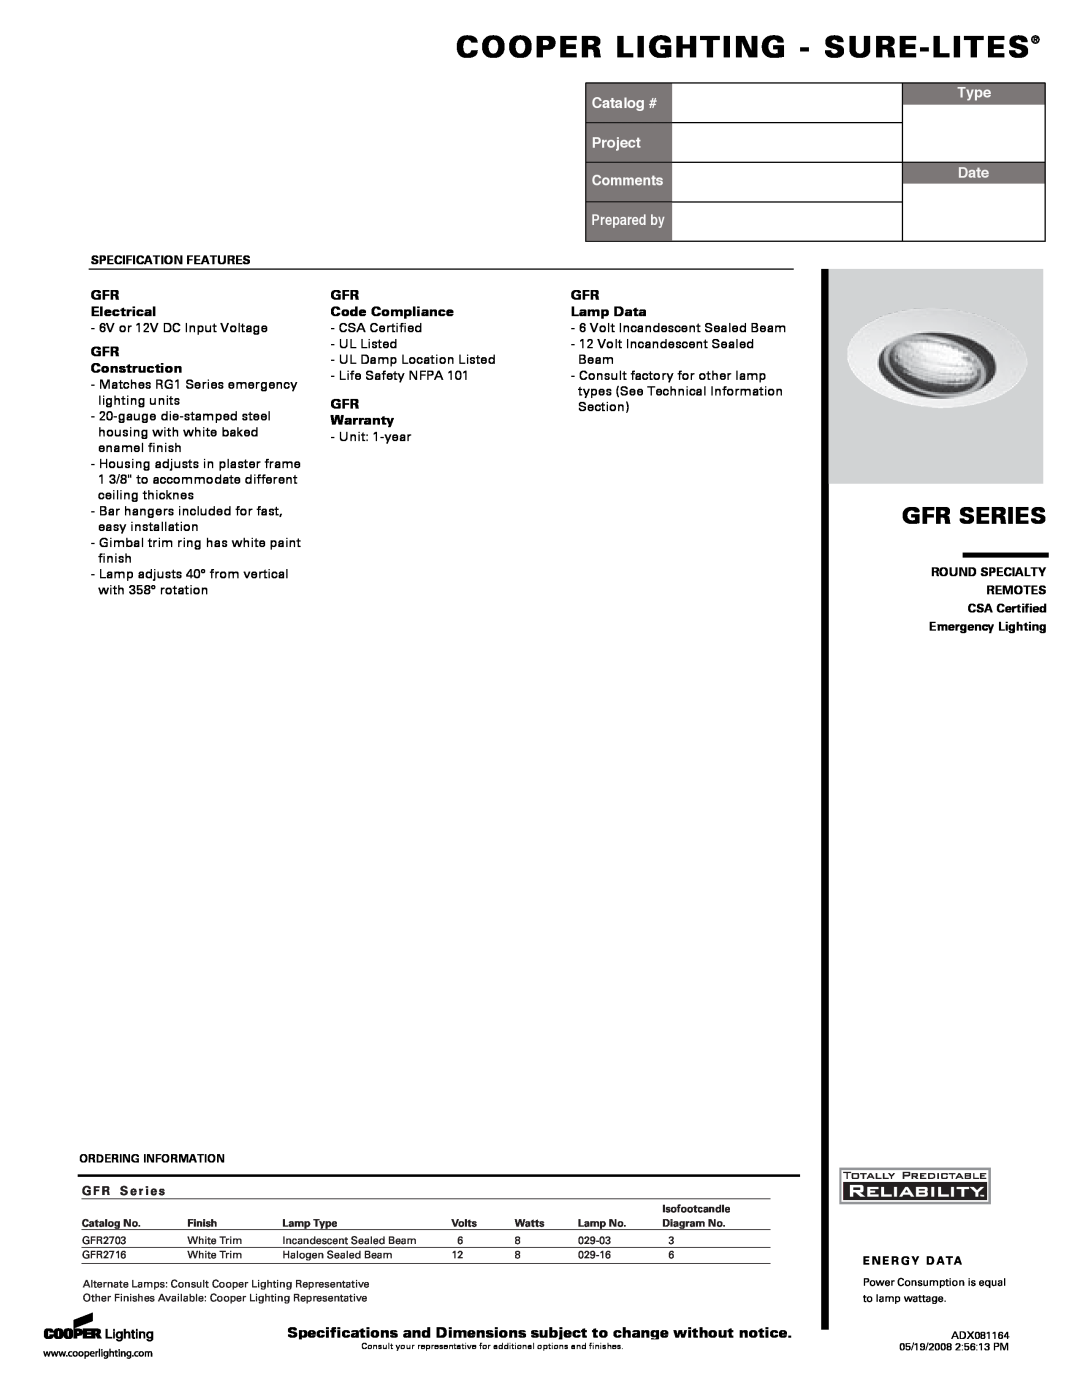 Cooper Lighting GFR specifications Cooper Lighting - Sure-Lites, Gfr Series, Catalog #, Project Comments, Prepared by 